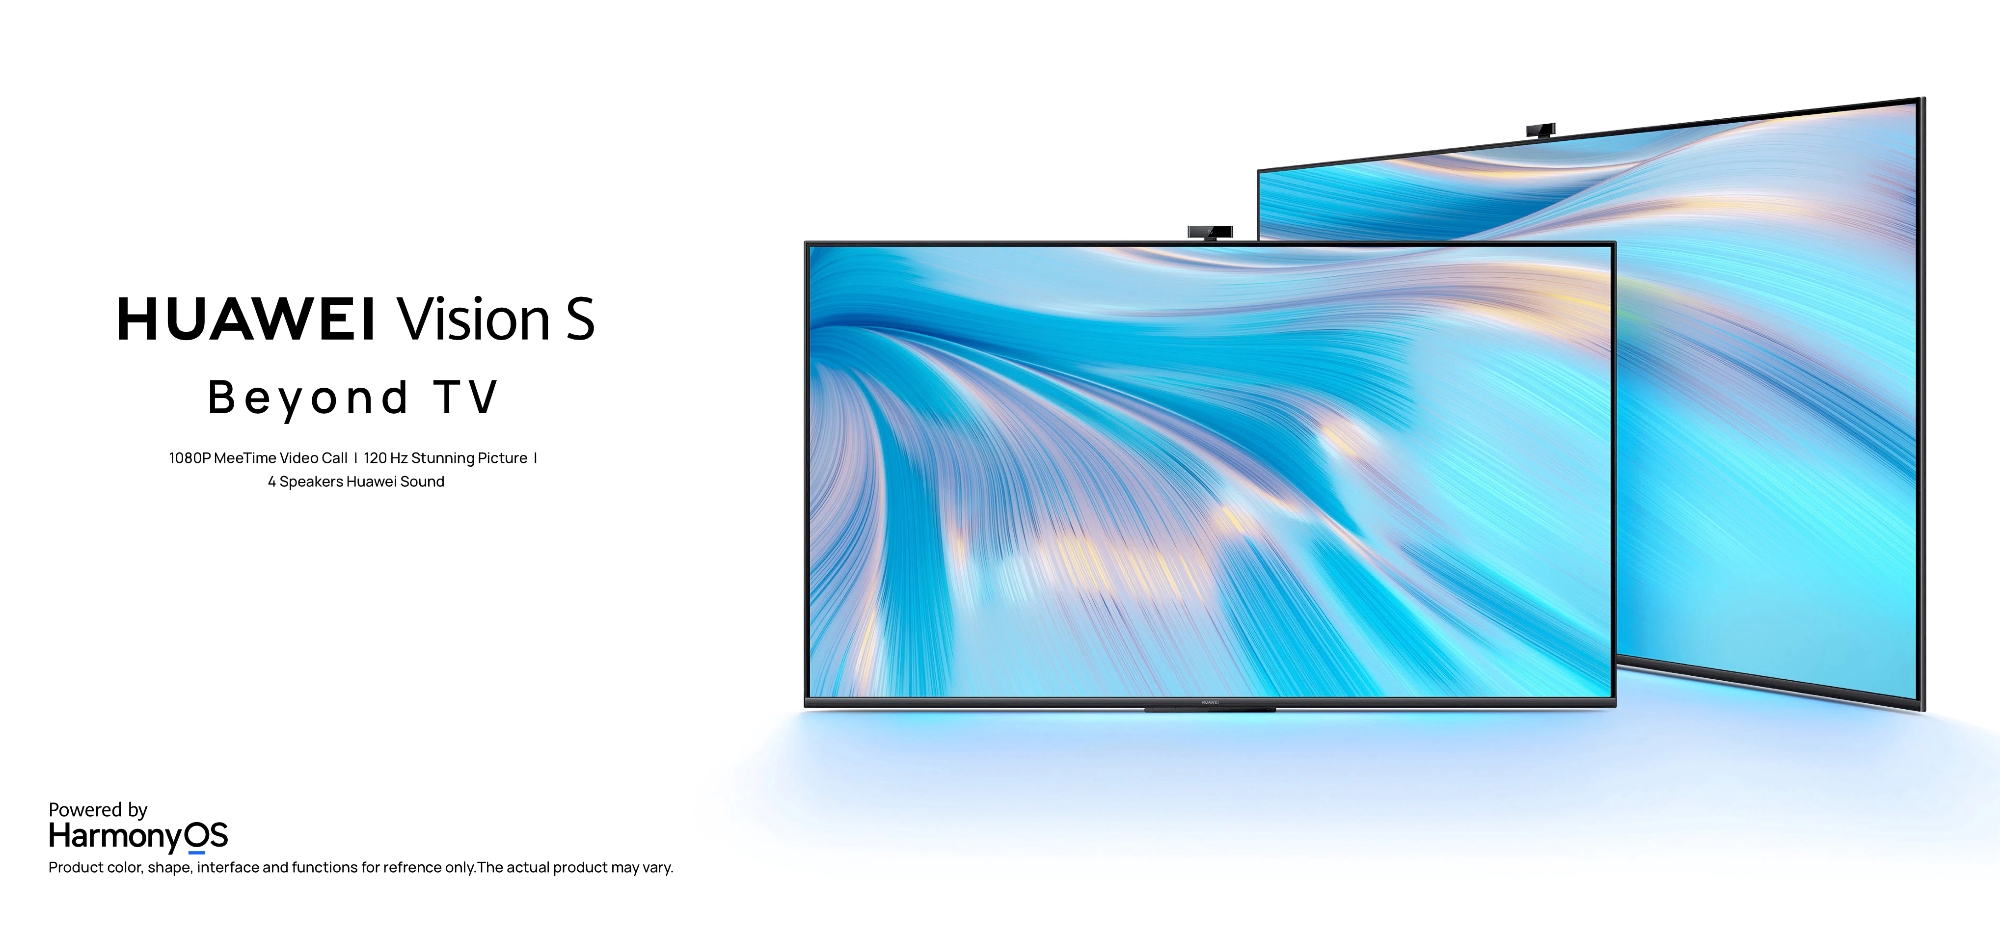 Huawei unveils Vision S smart TVs globally with 120Hz displays and HarmonyOS inside